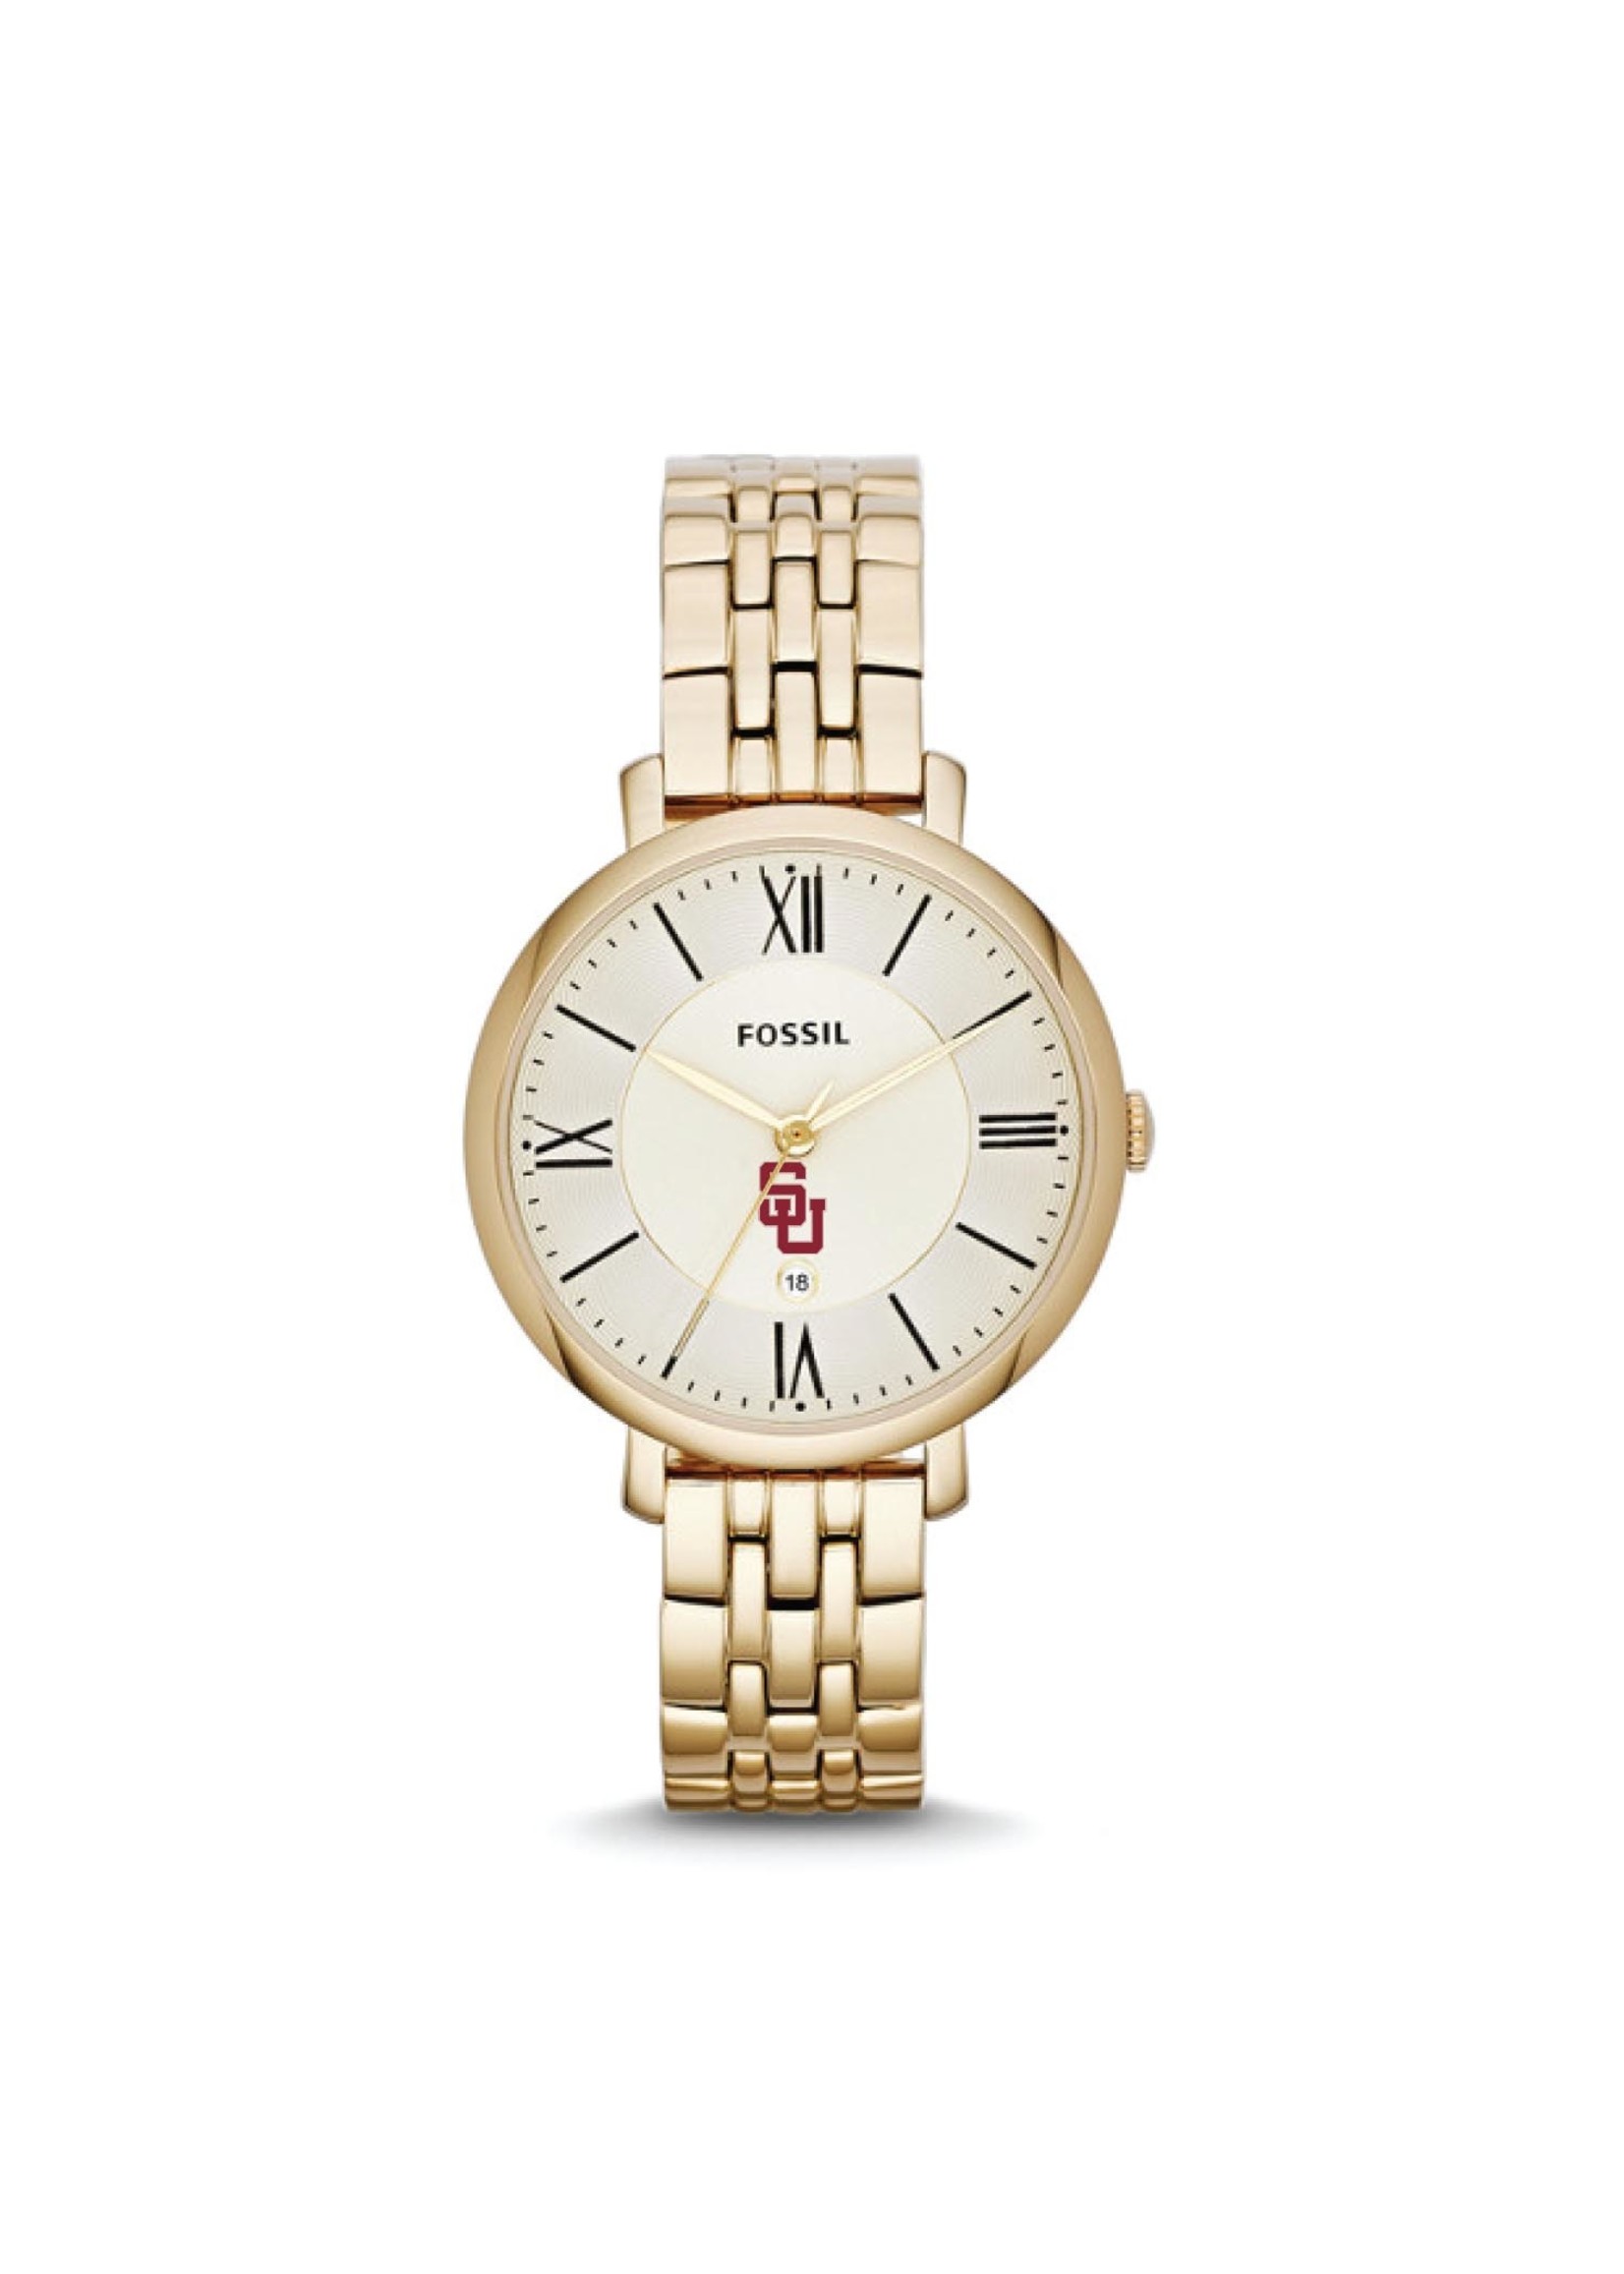 Fossil Fossil Large Face Women's Gold Watch